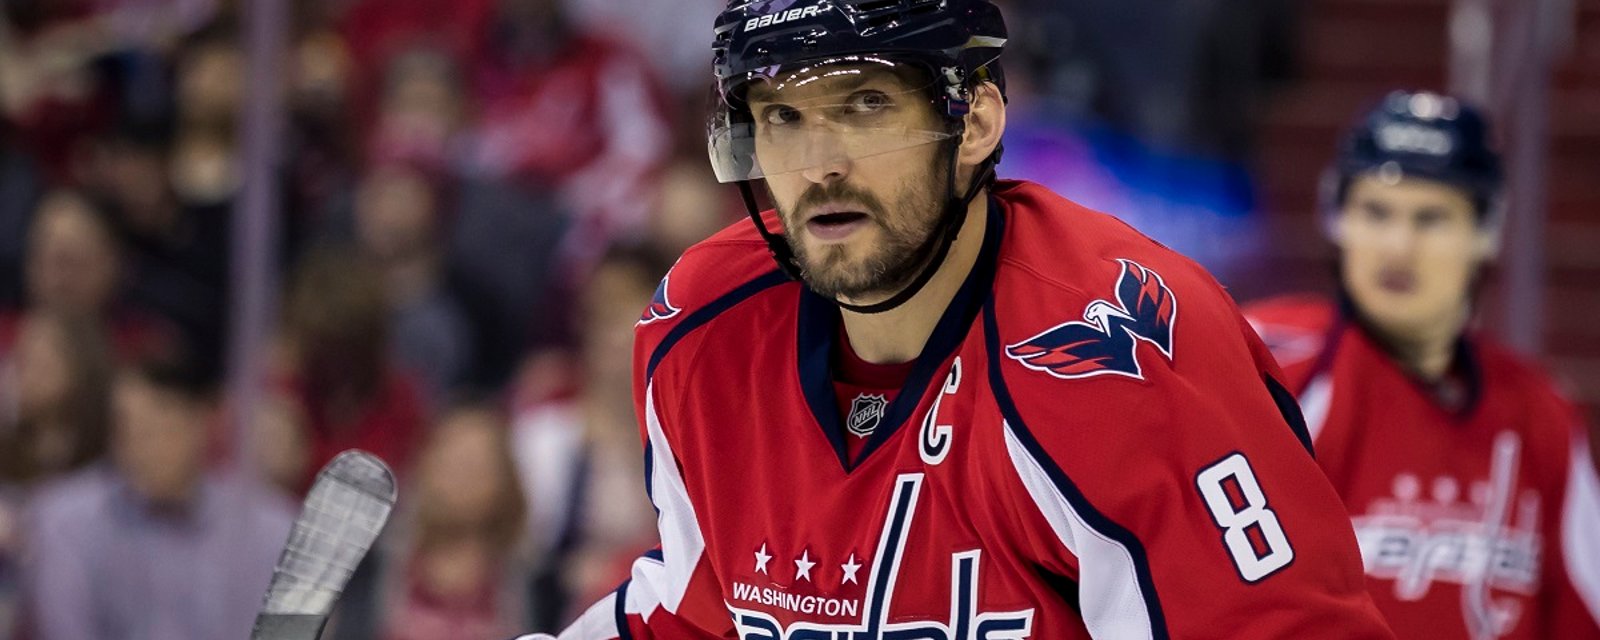 Breaking: NHL may have found a way to keep Alex Ovechkin out of the Olympics.